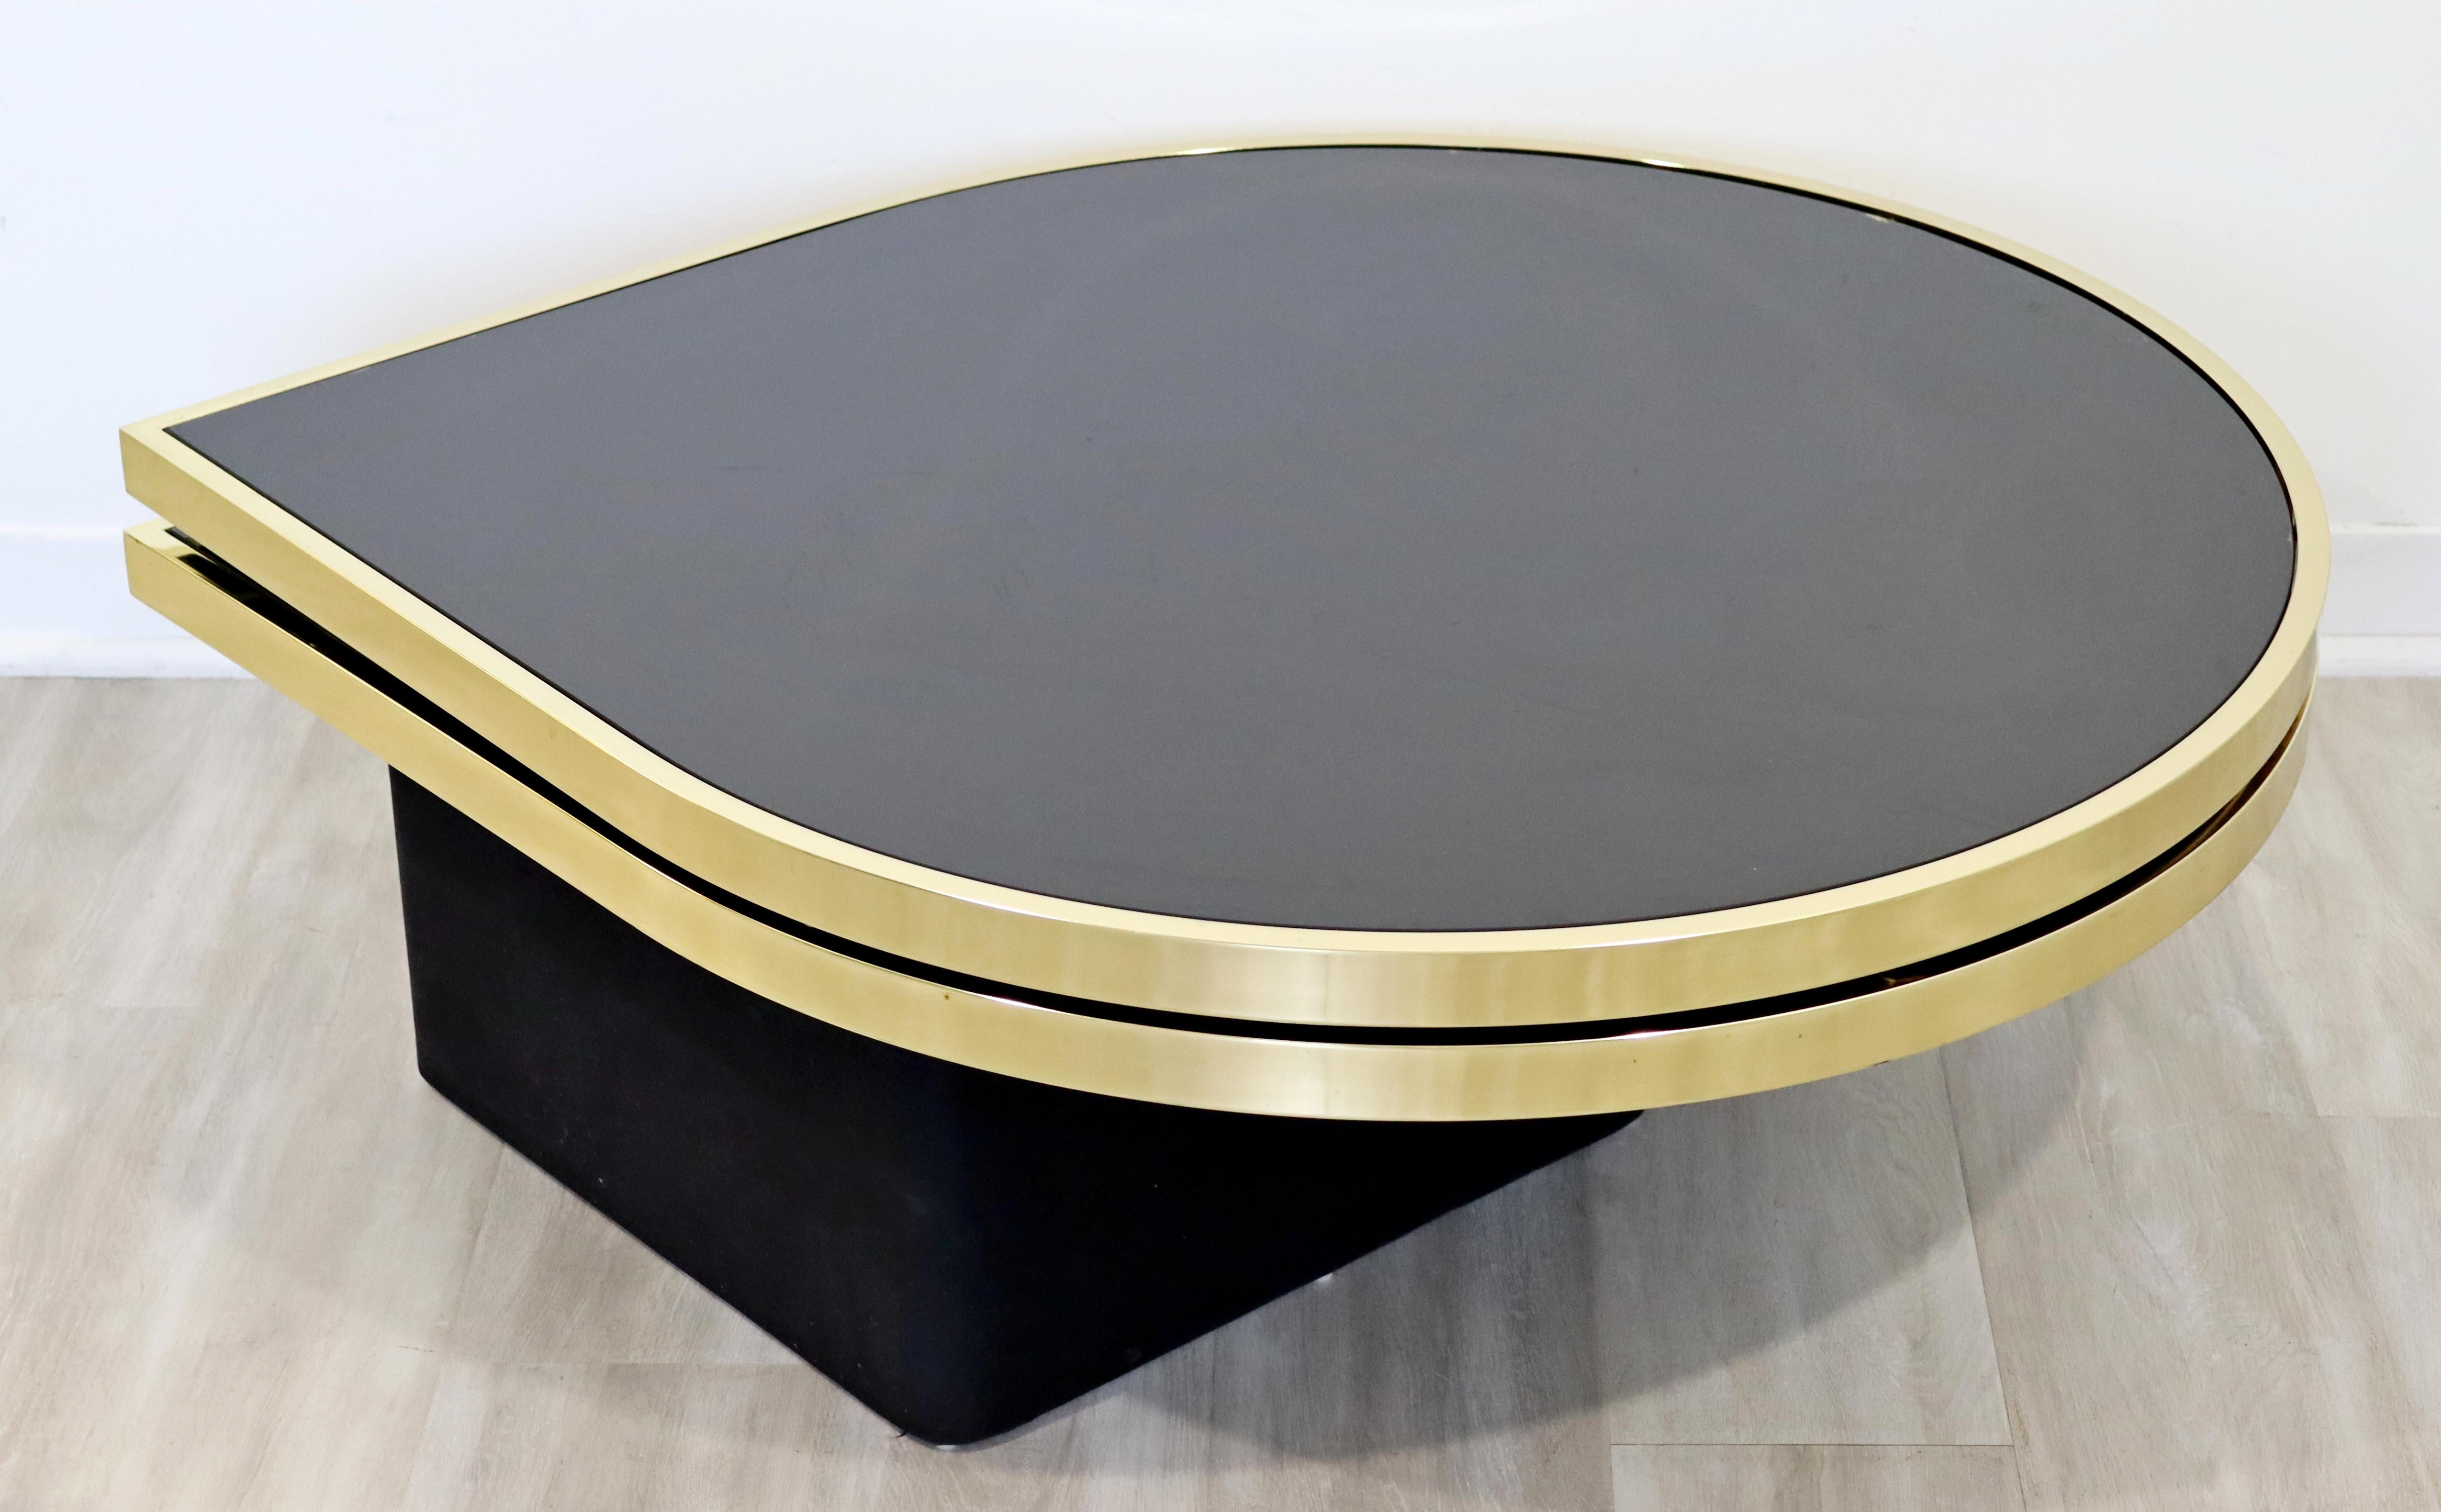 For your consideration is a terrific, teardrop shaped, brass coffee or cocktail table, with two swiveling tiers and smoked glass tops, by the Design Institute of America, circa the 1980s. In excellent vintage condition. The dimensions are 43